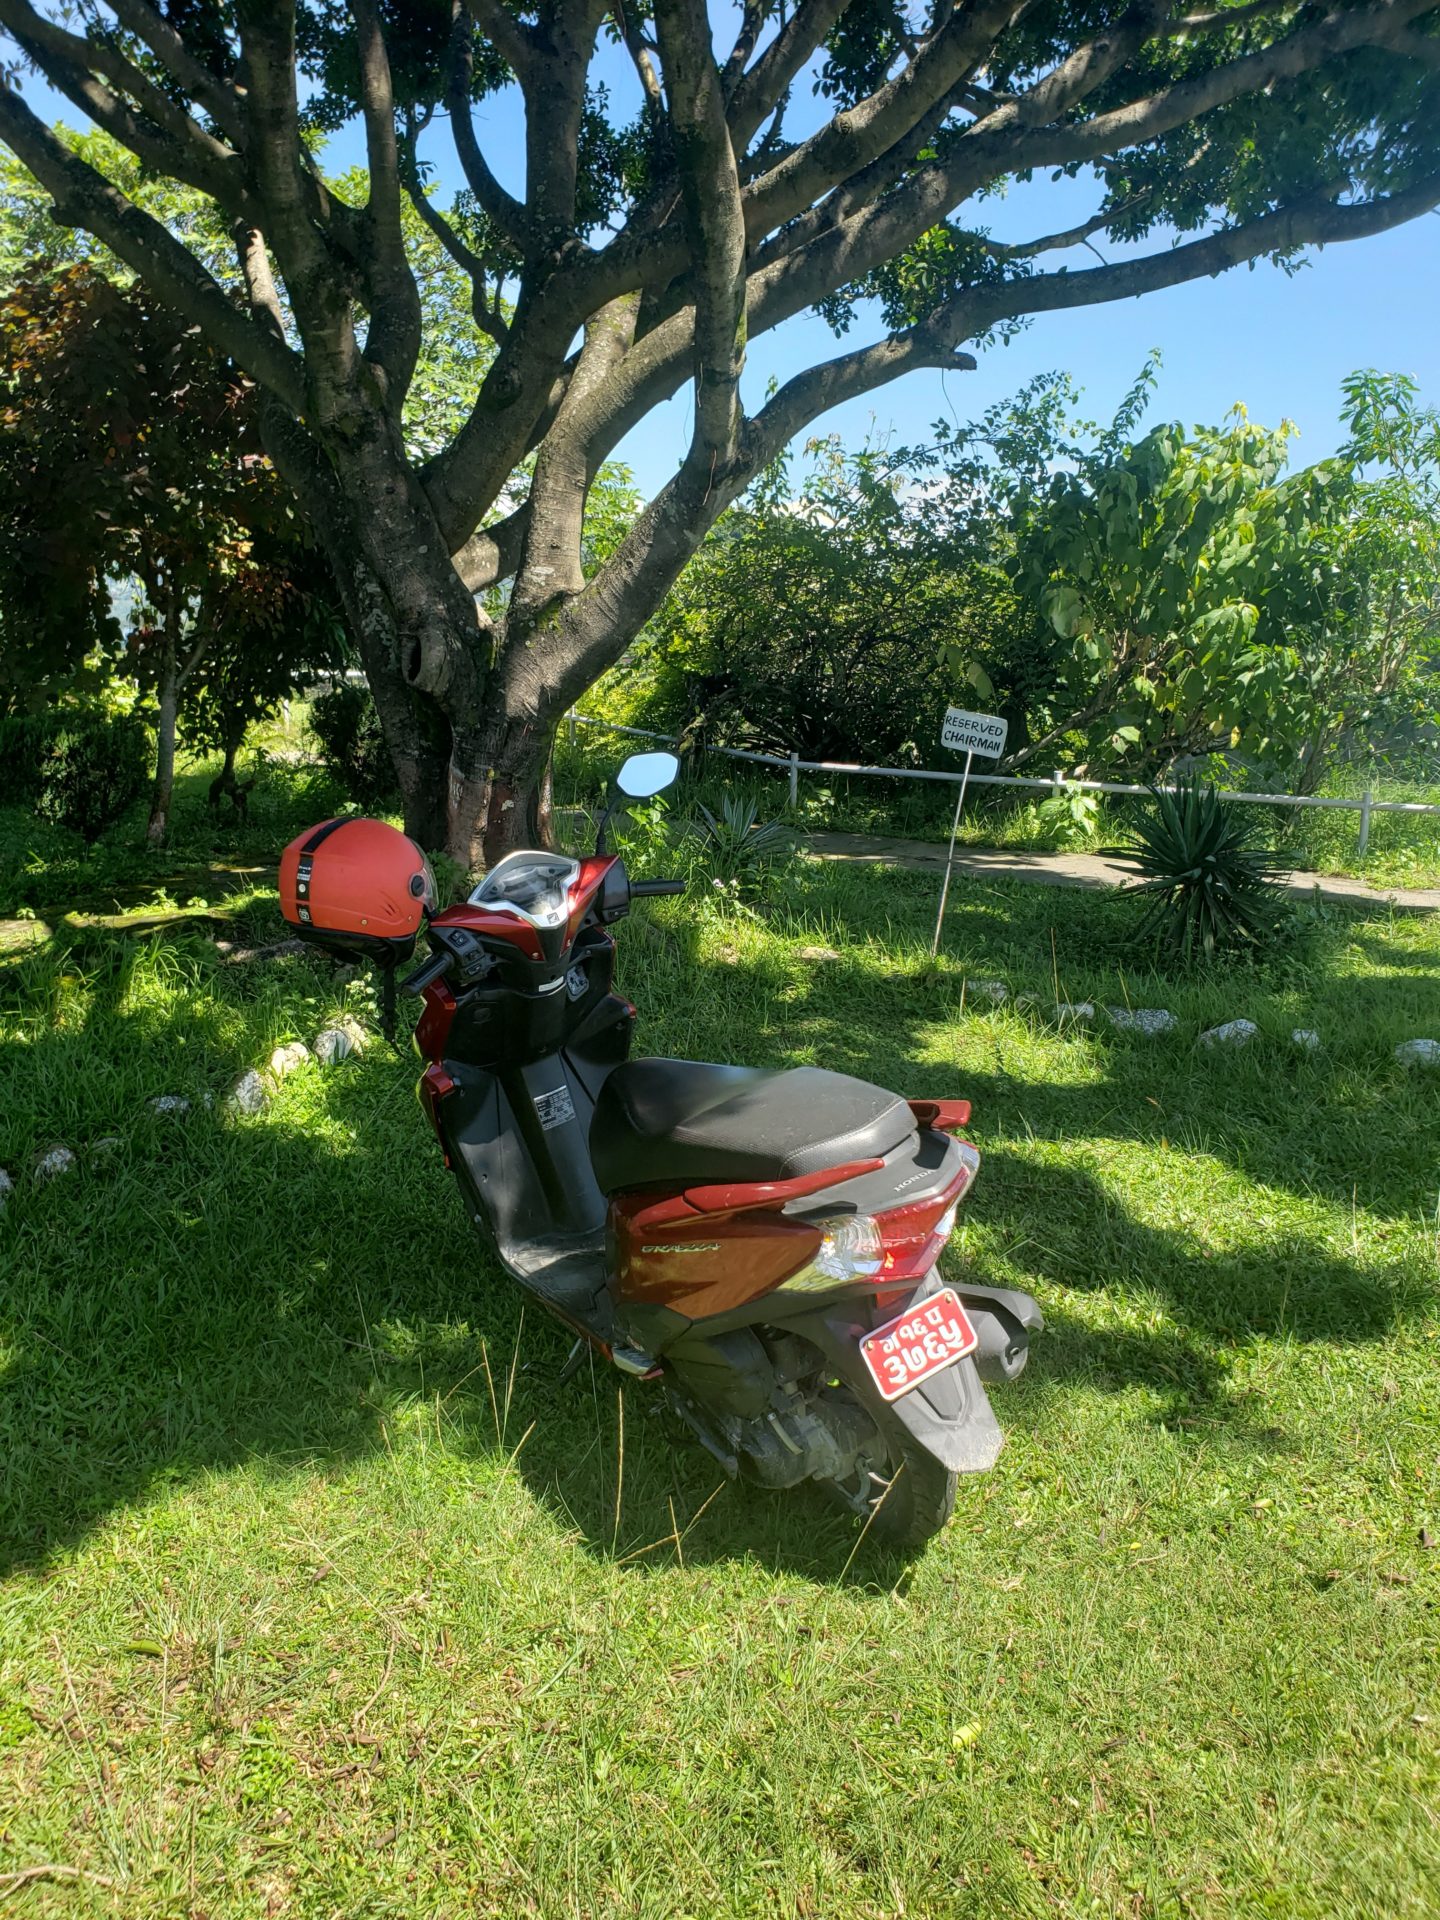 a motorcycle parked in a grassy area